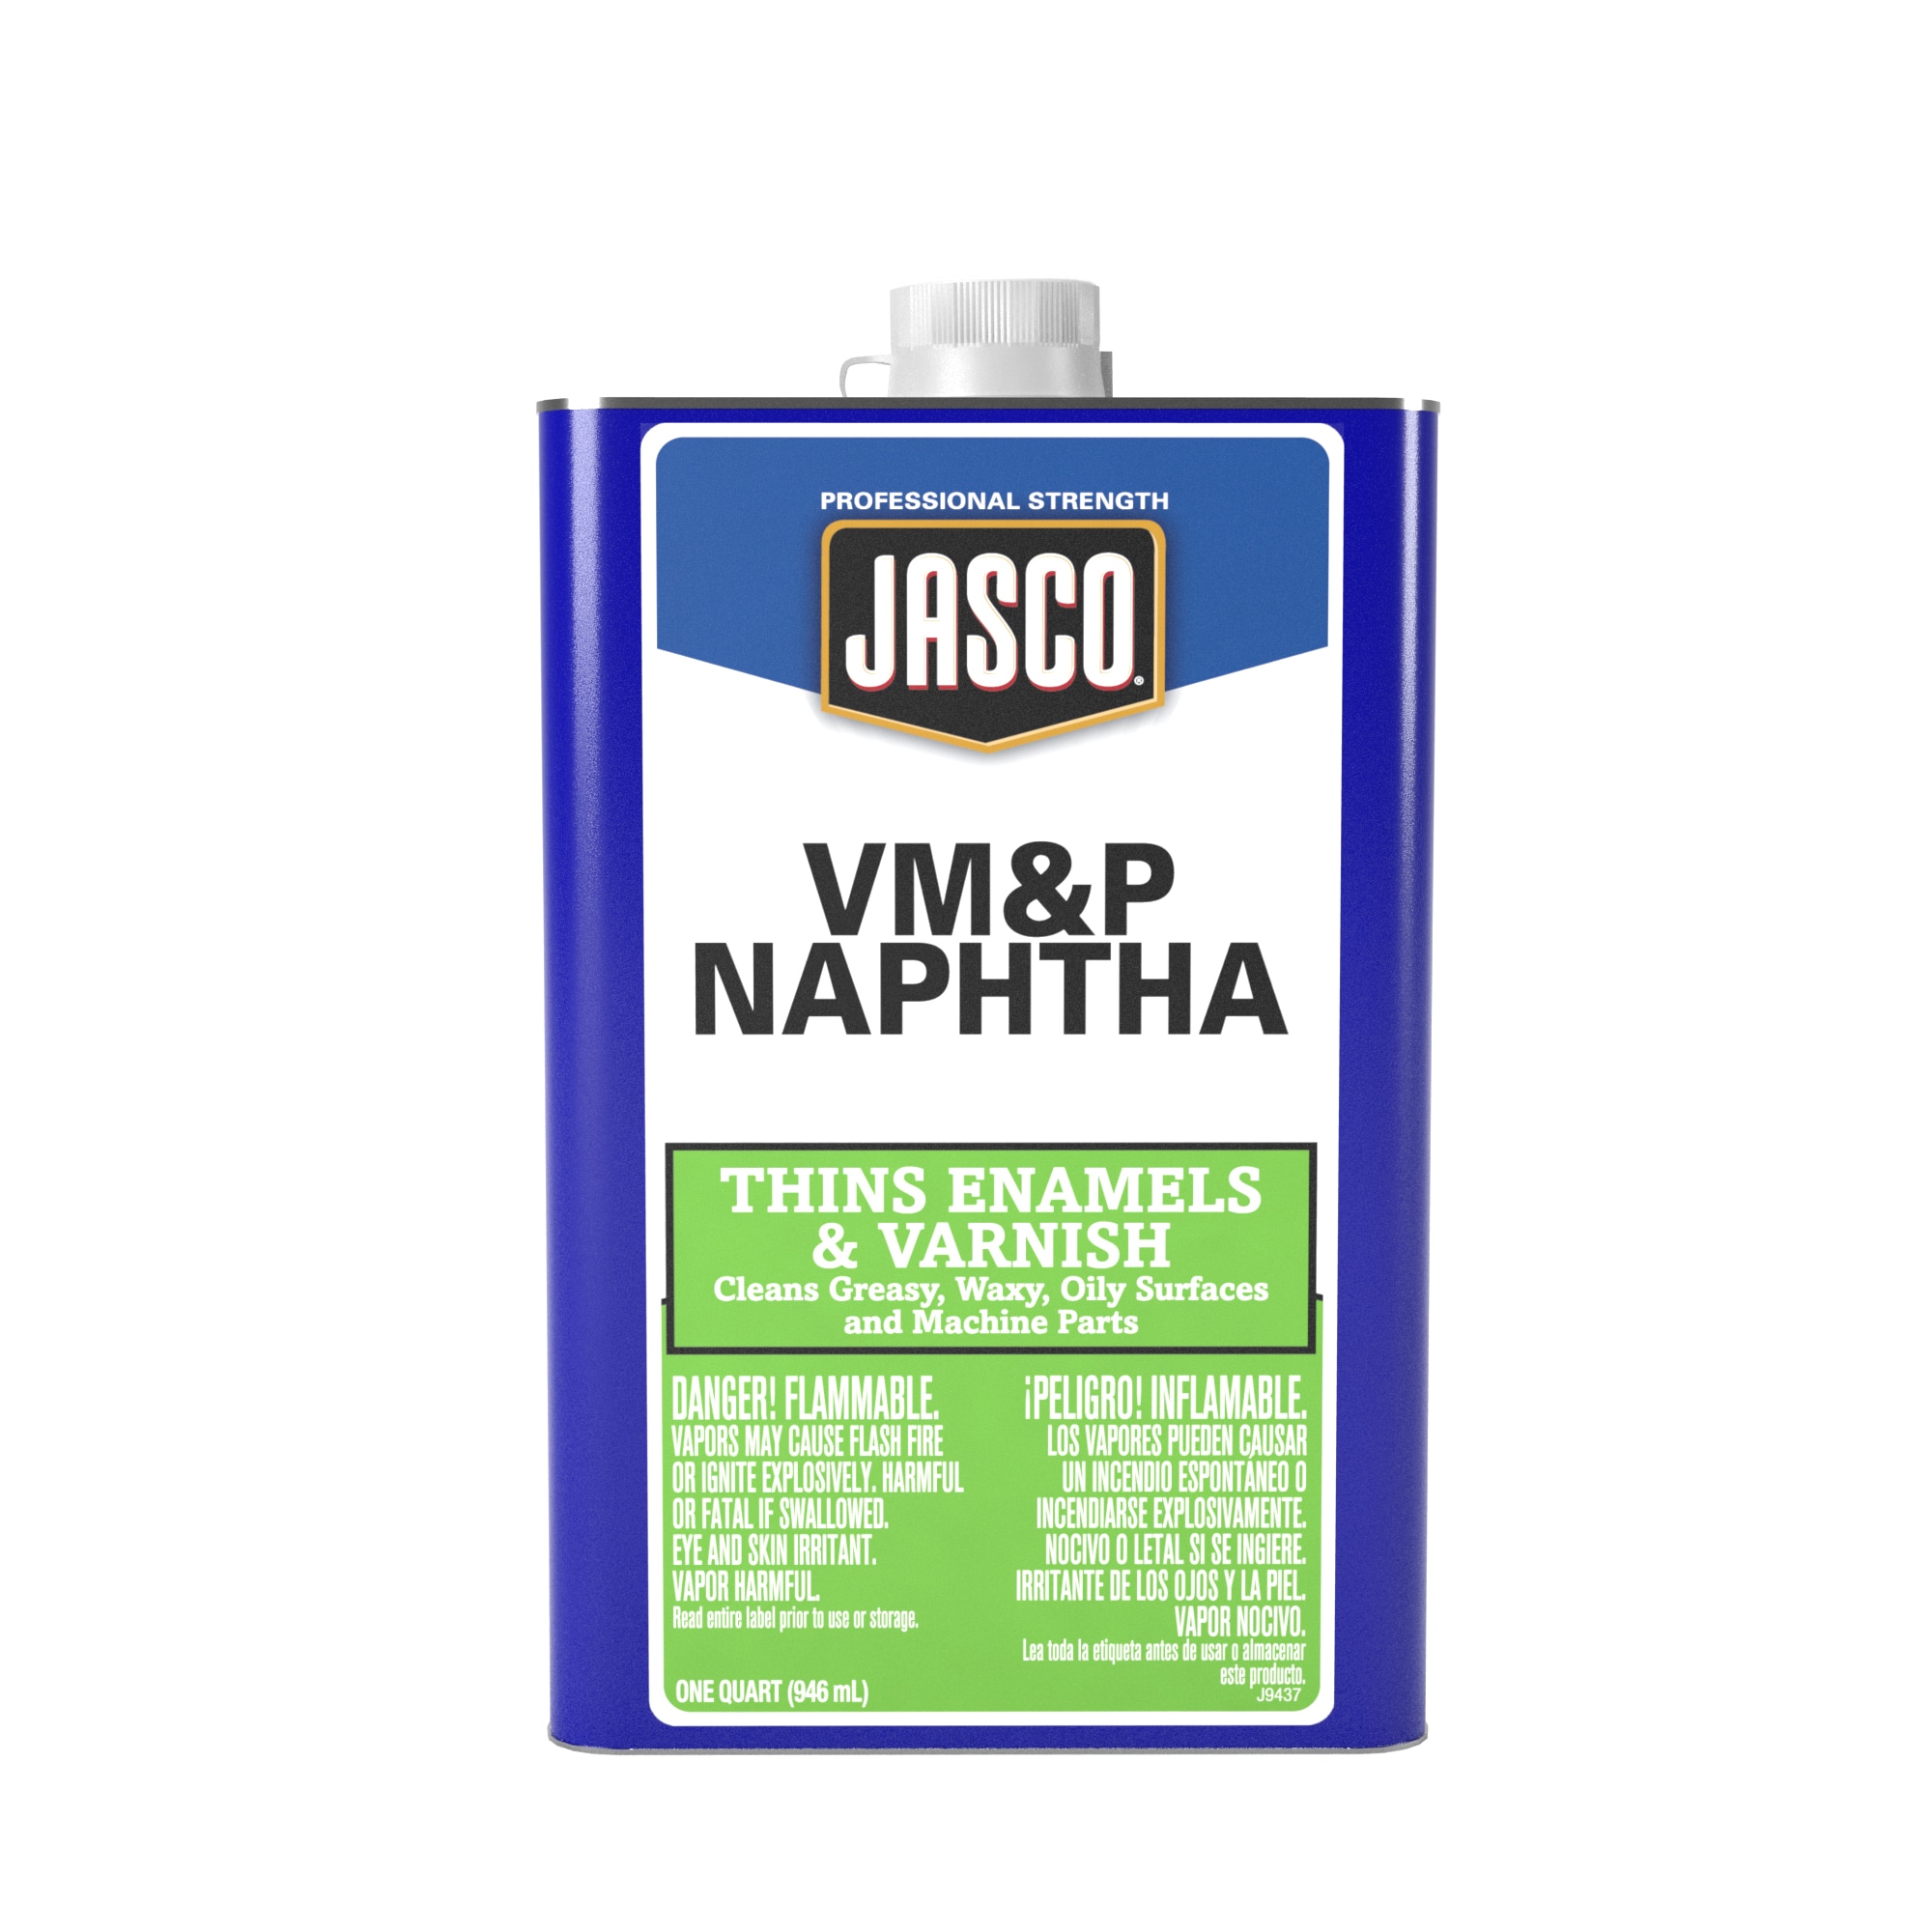 Naphtha Uses - Learn Important Terms and Concepts